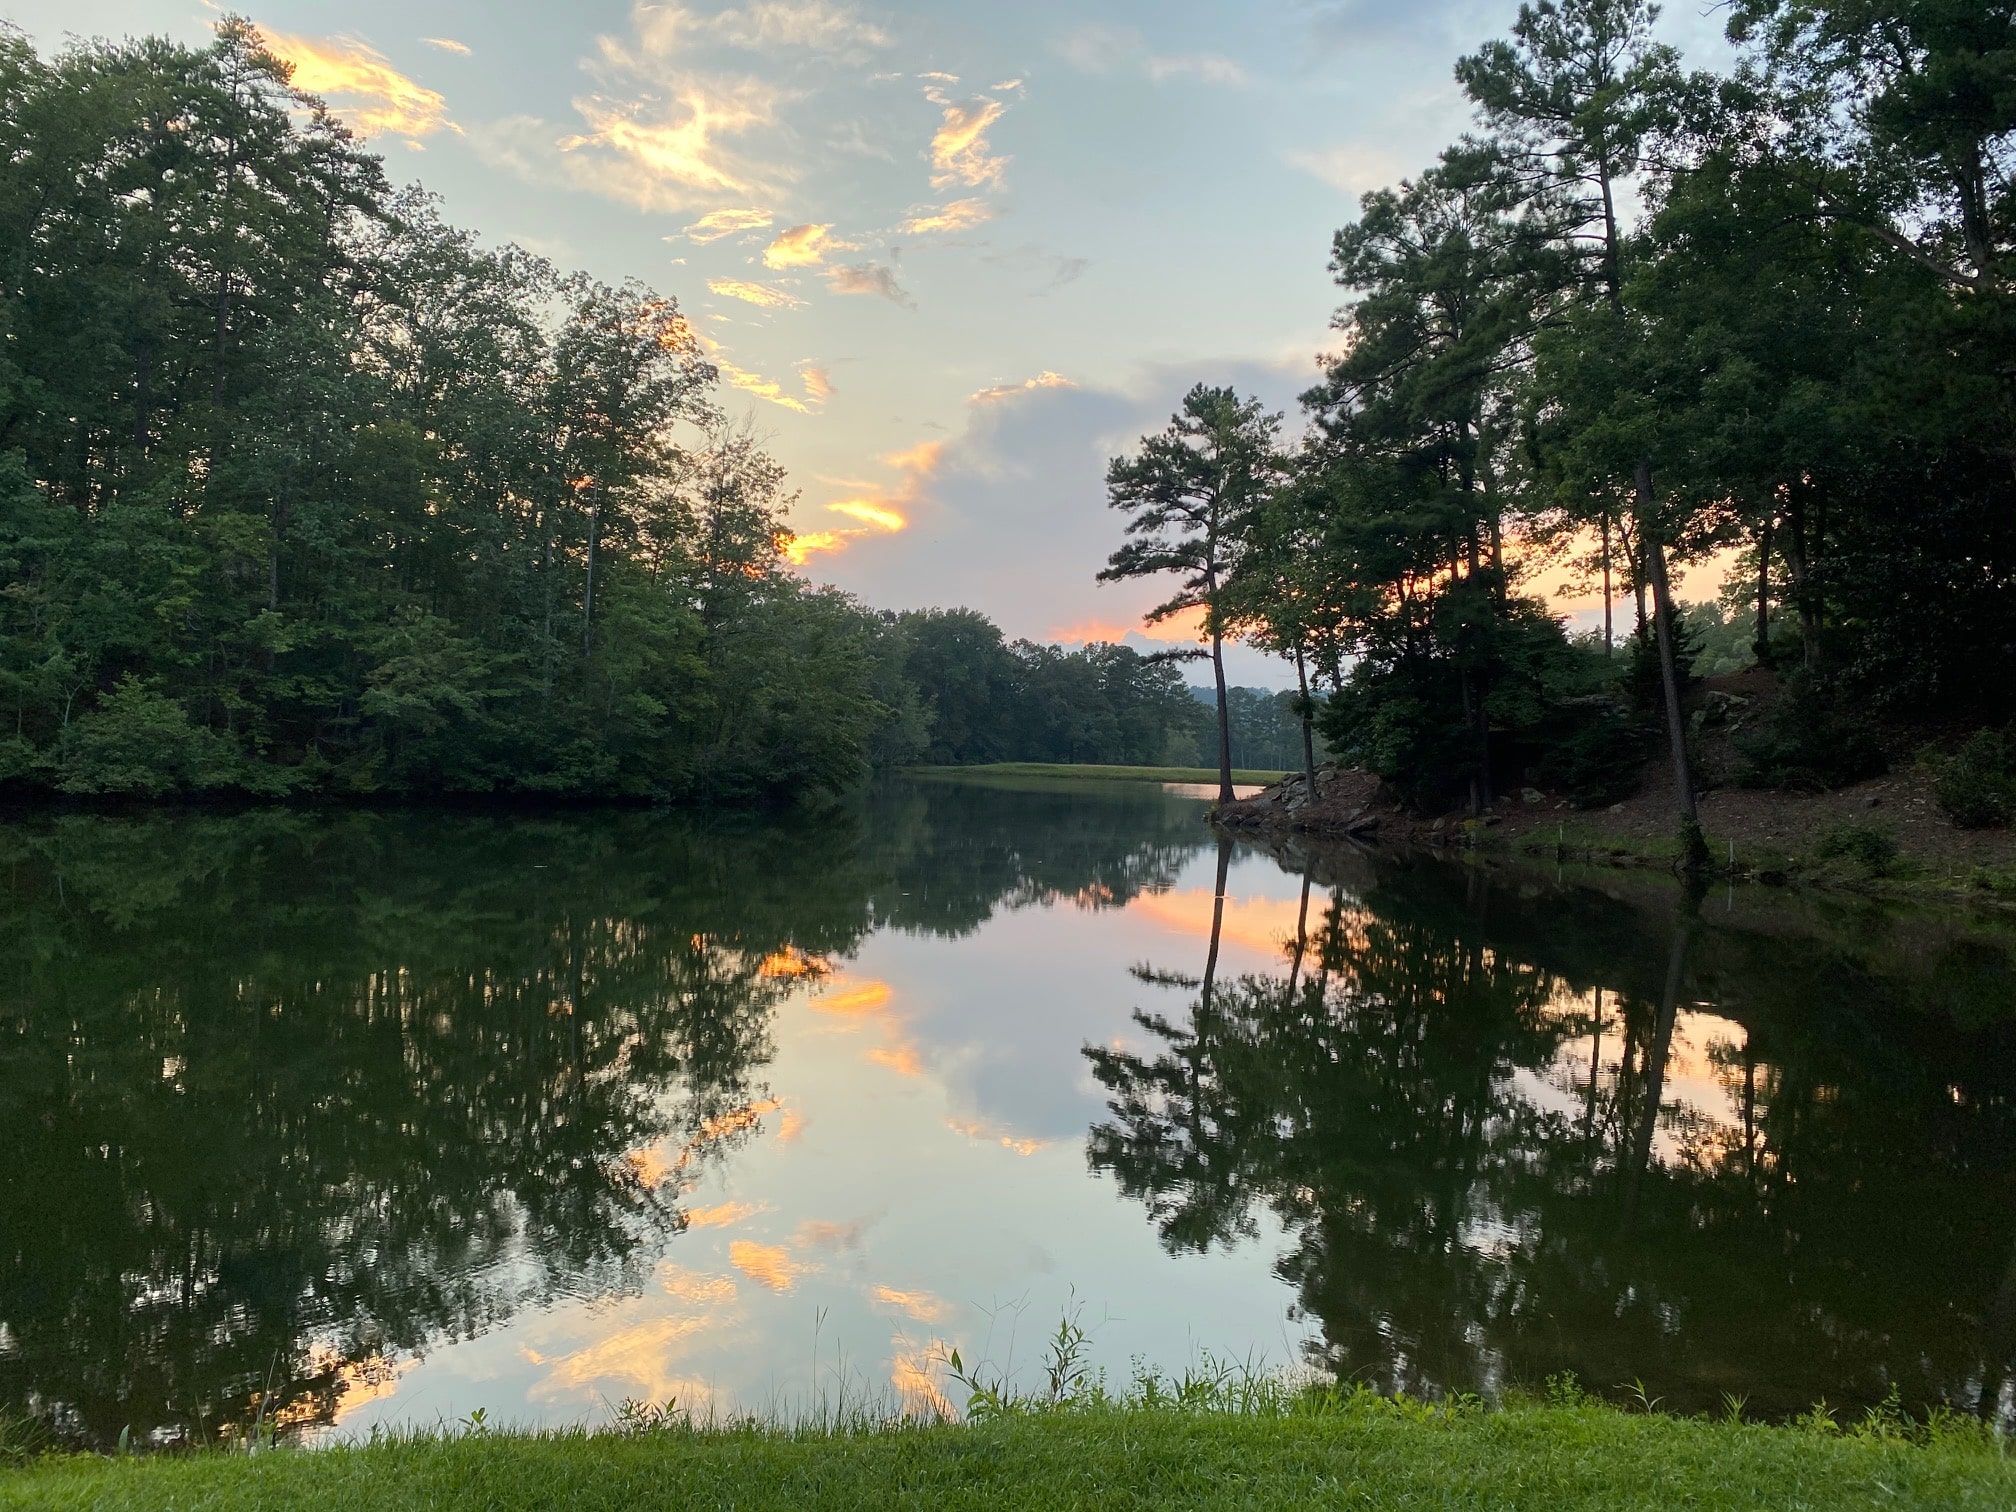 Shoal Creek at sunset. Our neighborhood makes it easy to know what to do after buying land